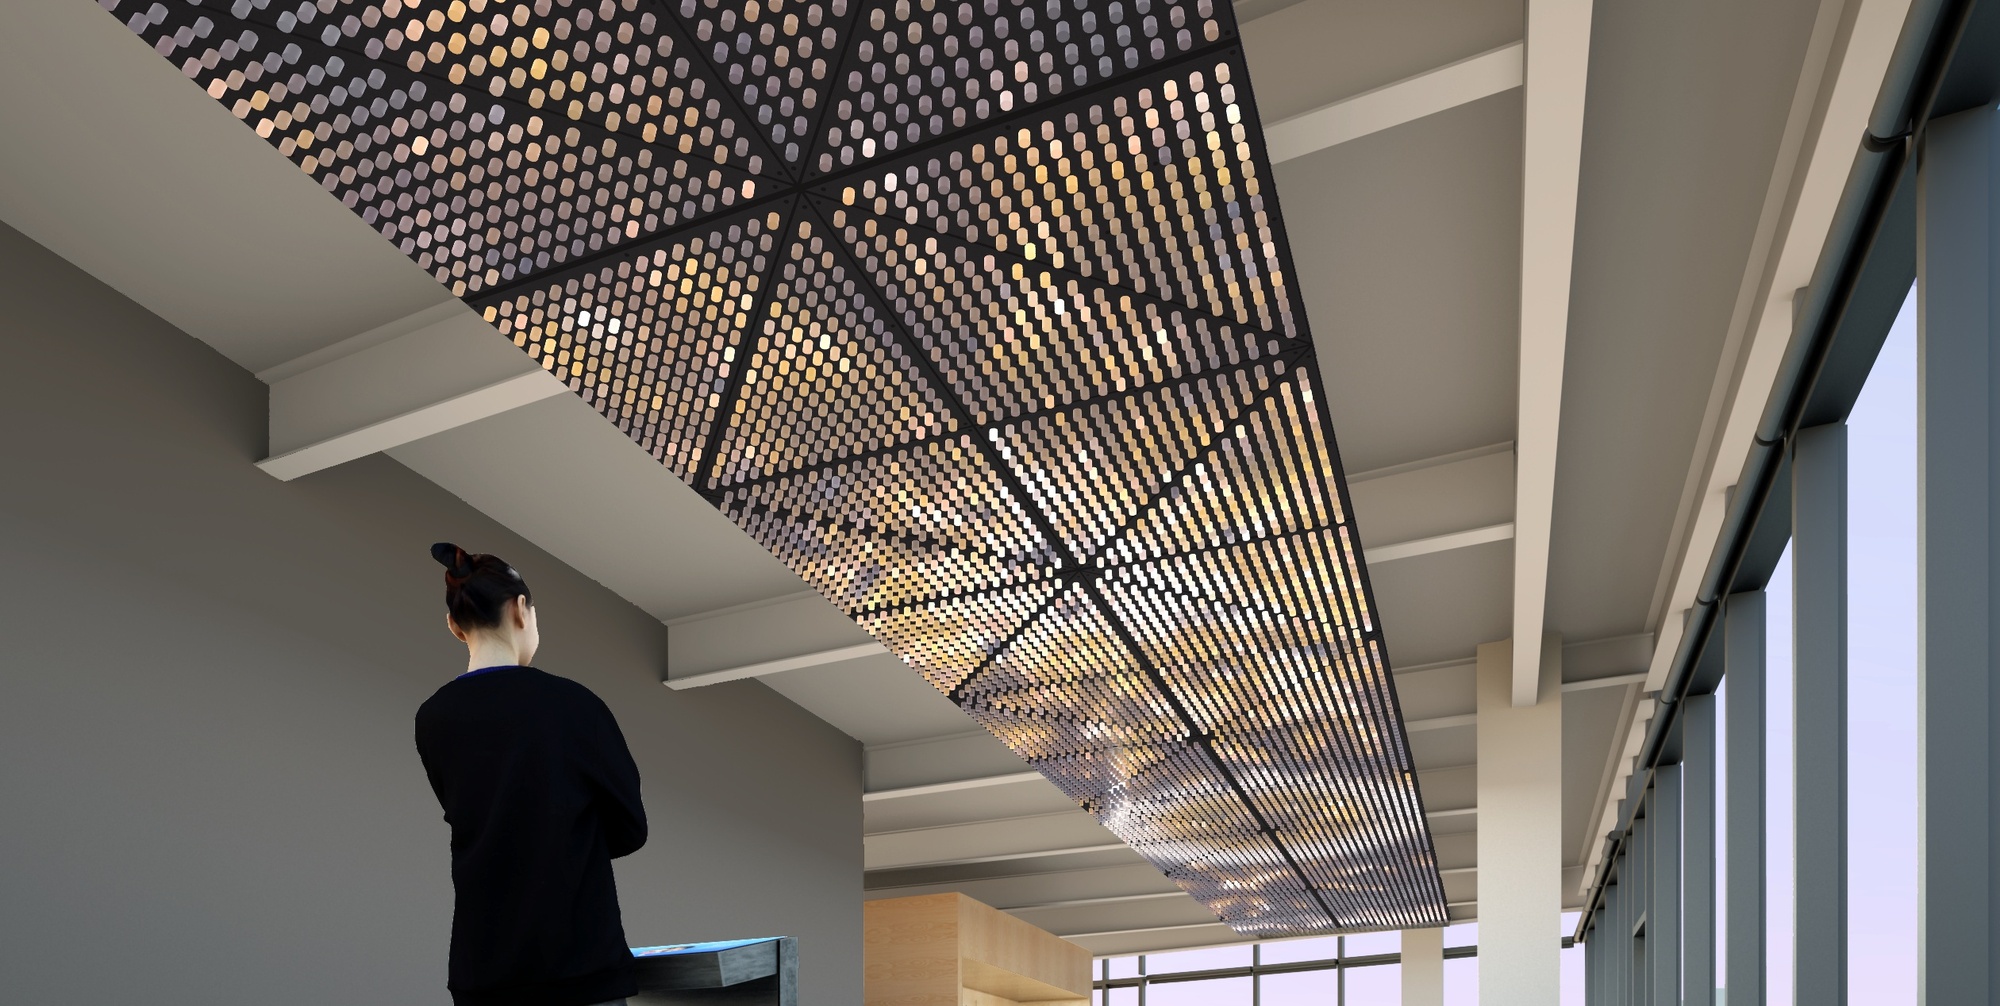 Render of woman looking up at installation attached to ceiling composed of light-emitting modules